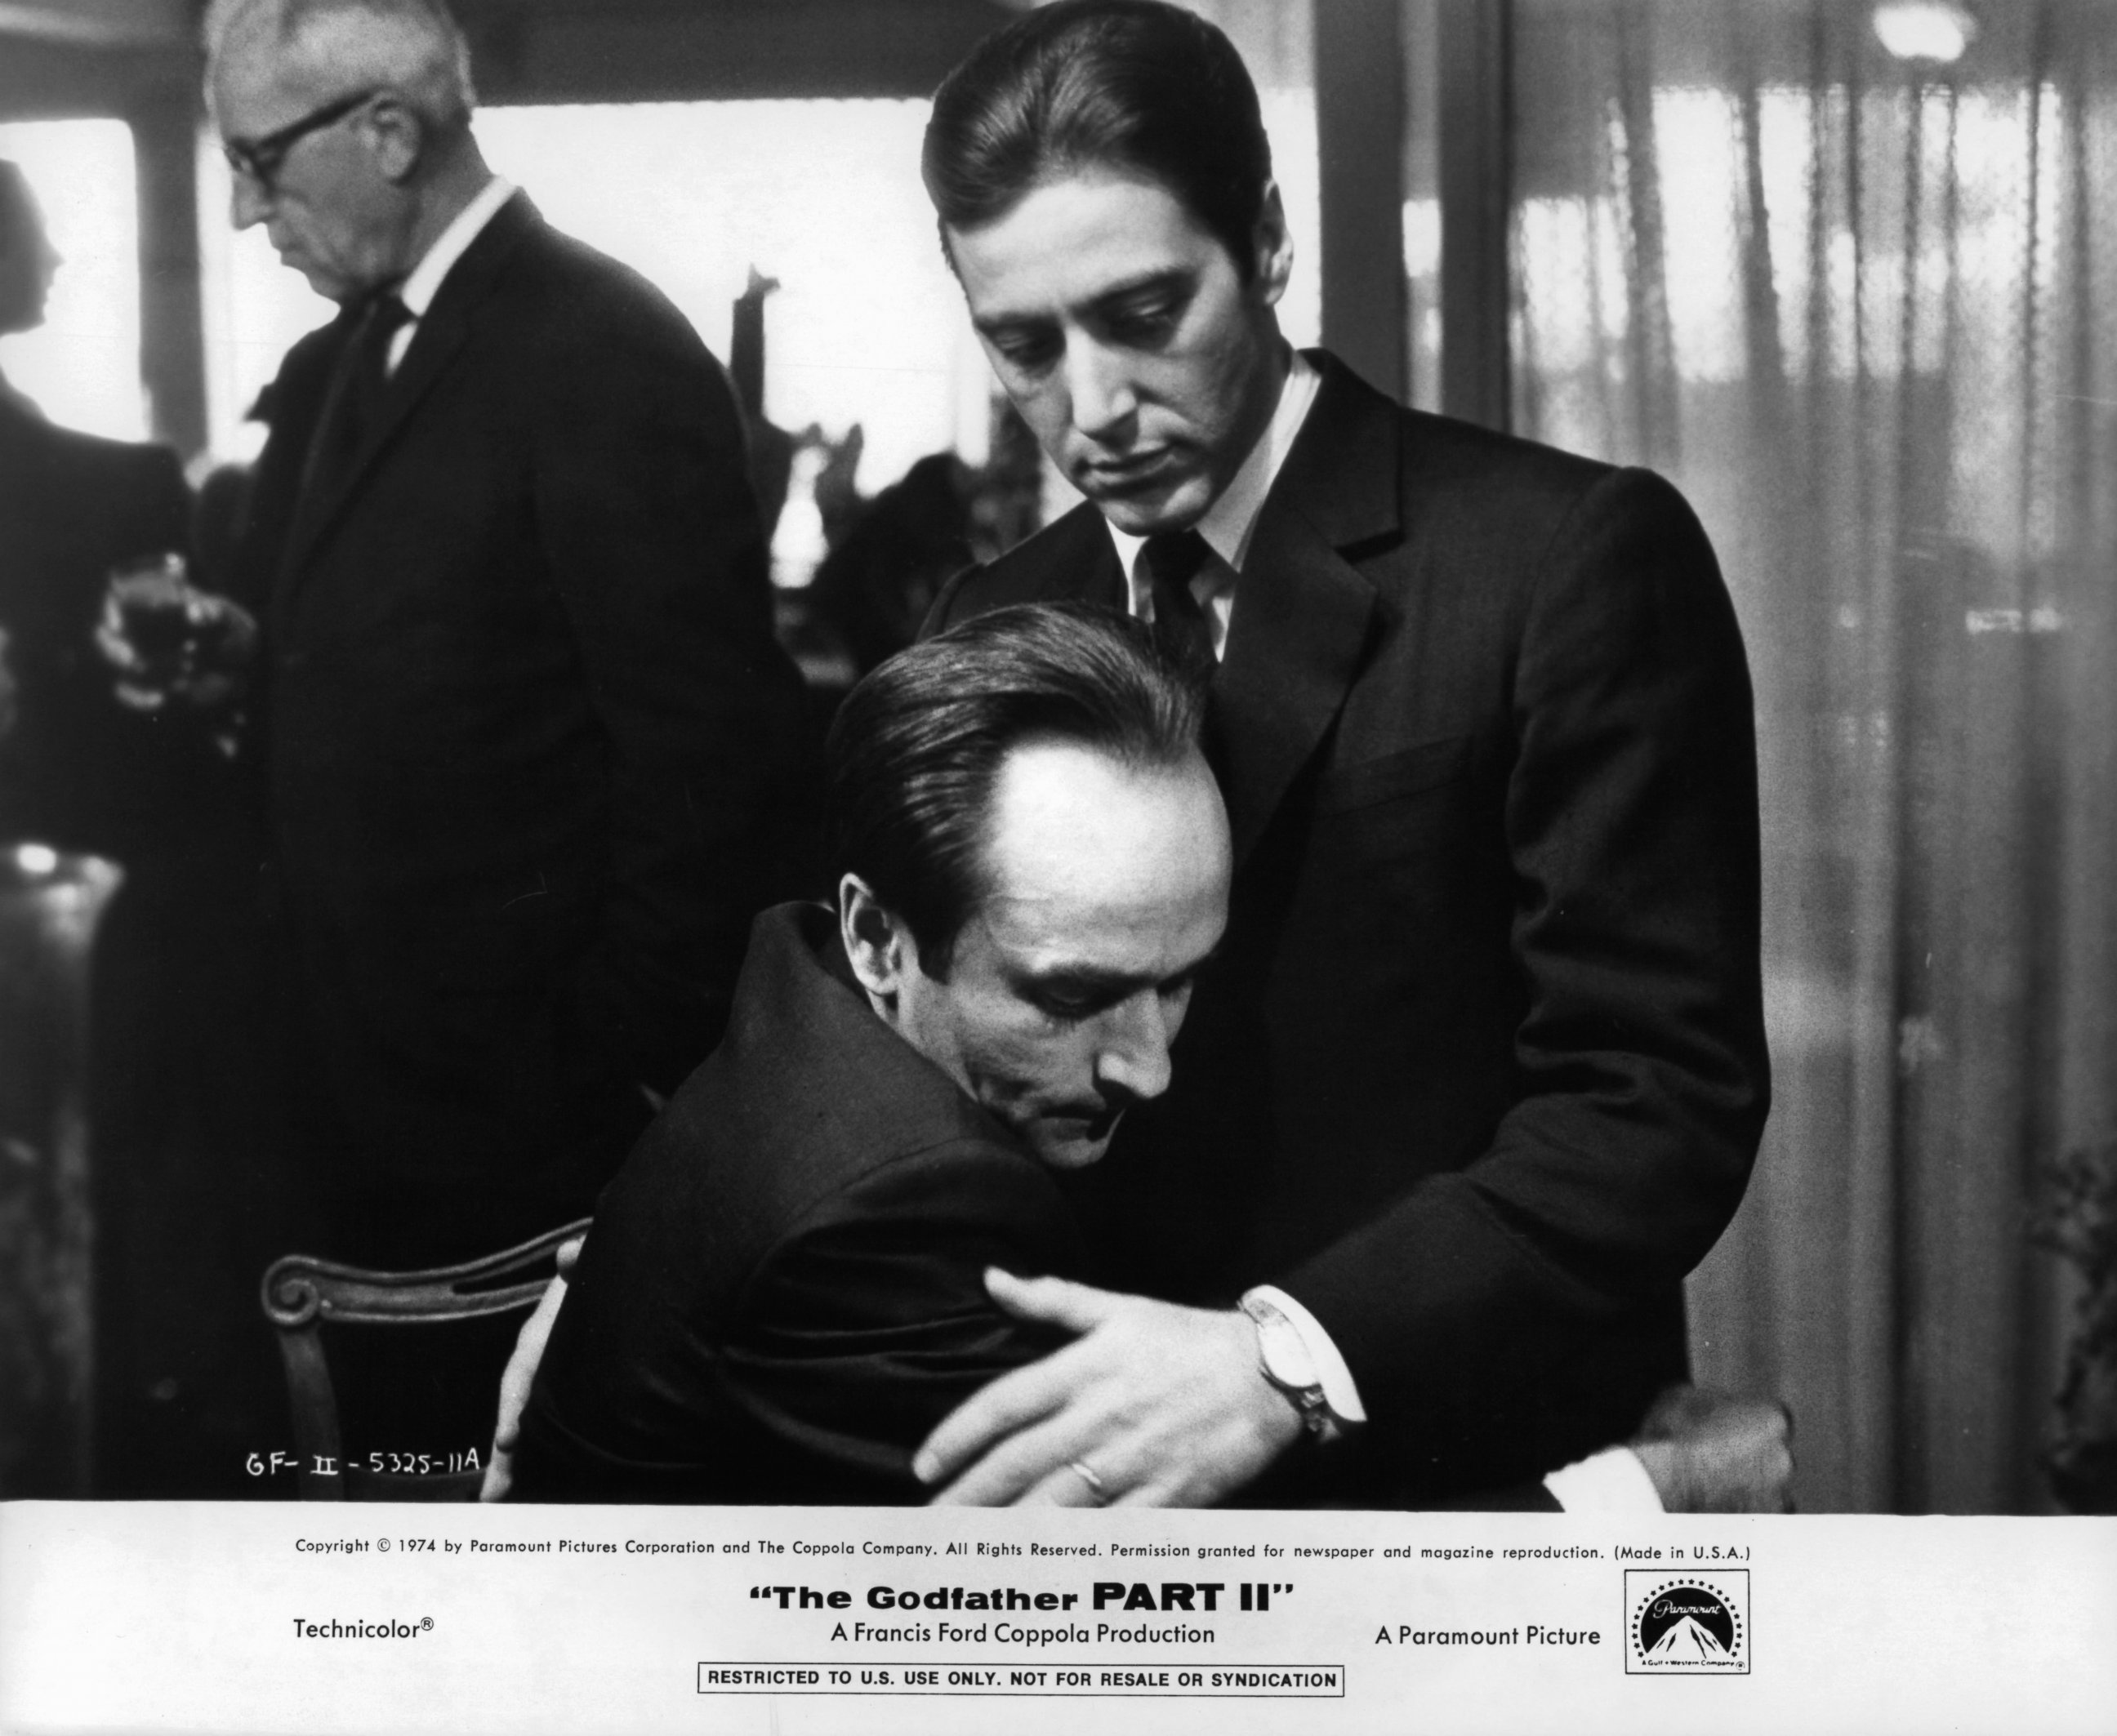 PHOTO: John Cazale holds his brother Al Pacino in a scene from the film "The Godfather," Part II," 1974.